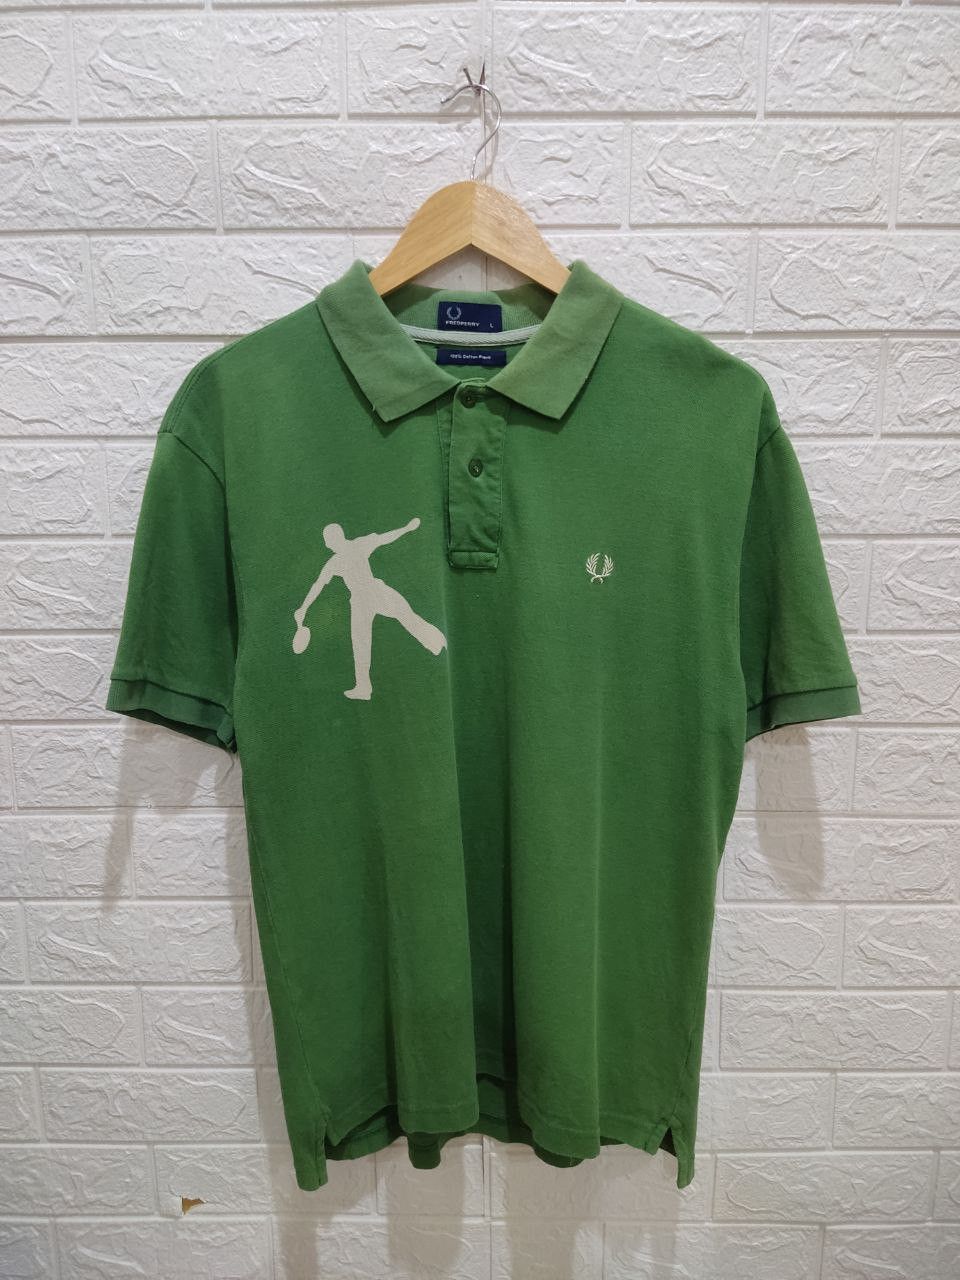 Vintage Fred Perry Tennis Big Graphic Polo Tees - 2